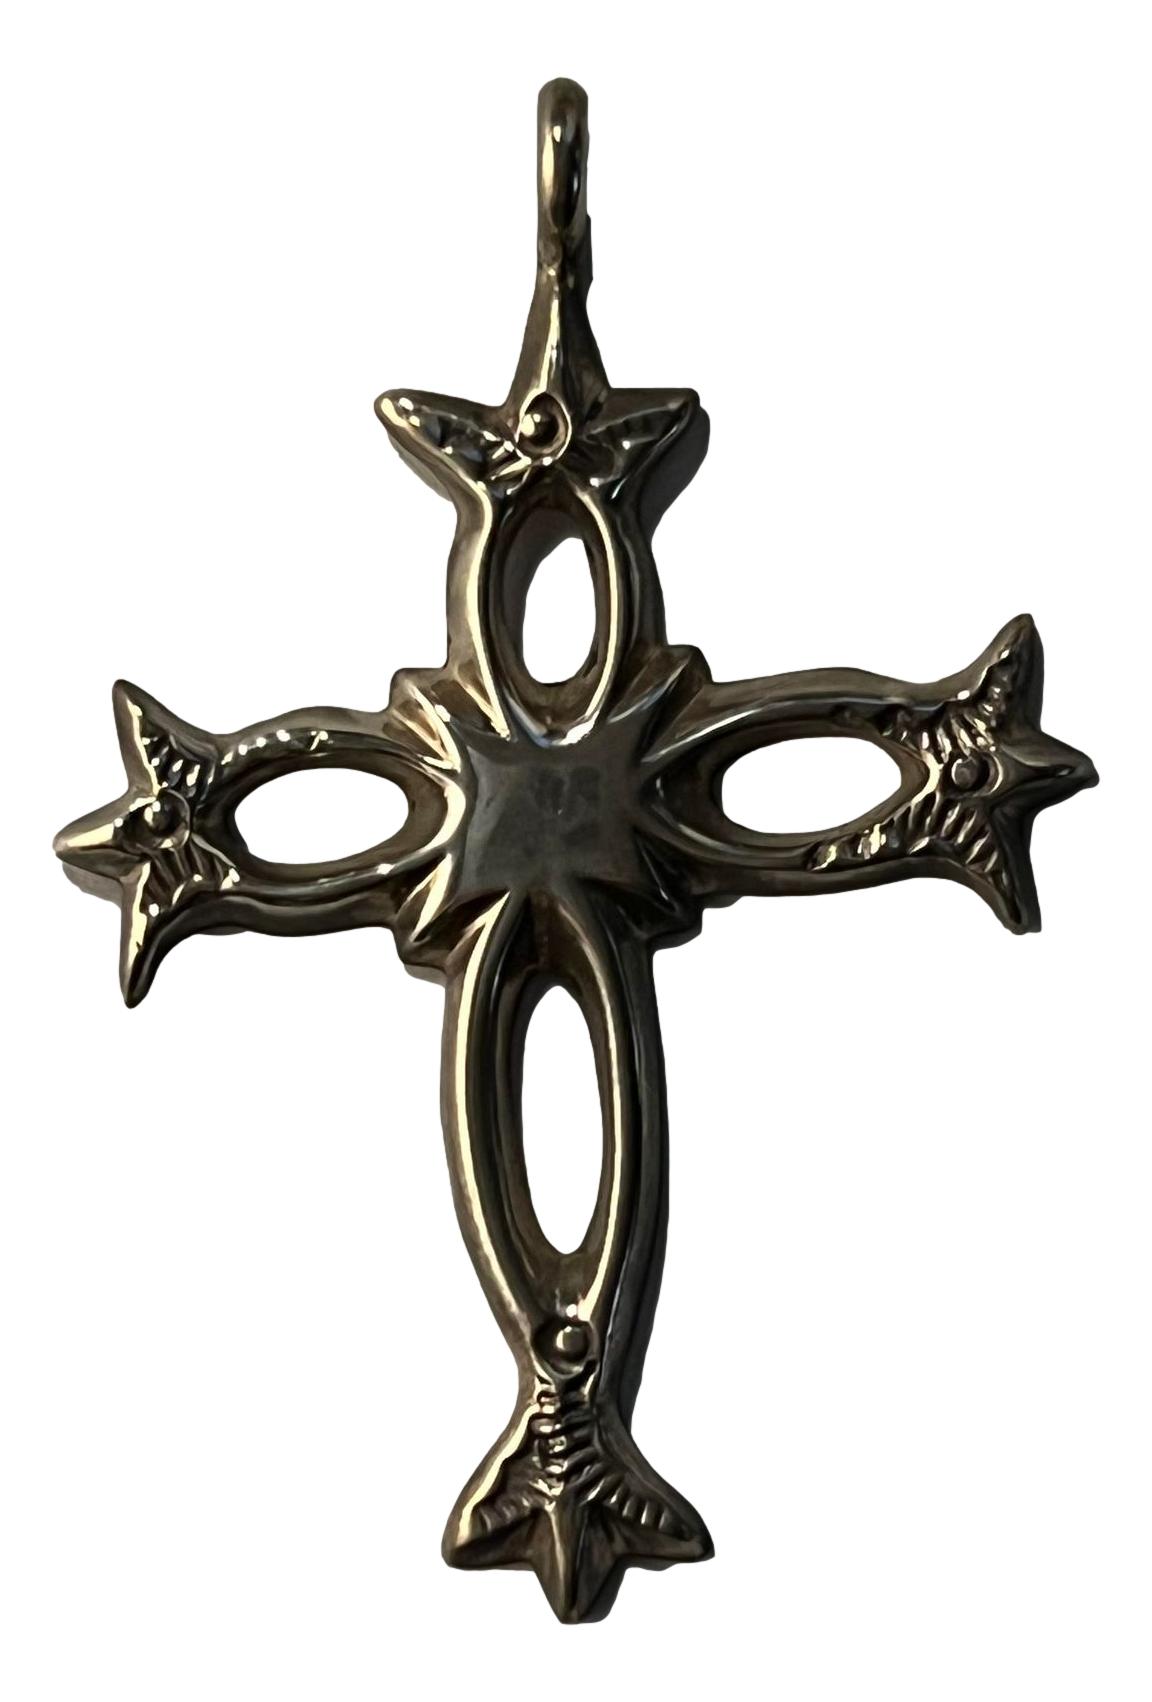 Pendant Cross Sterling Silver Handcrafted Skilled Native American Artisans 2 H Inch Cutout Center - Ysleta Mission Gift Shop- VOTED El Paso's Best Gift Shop